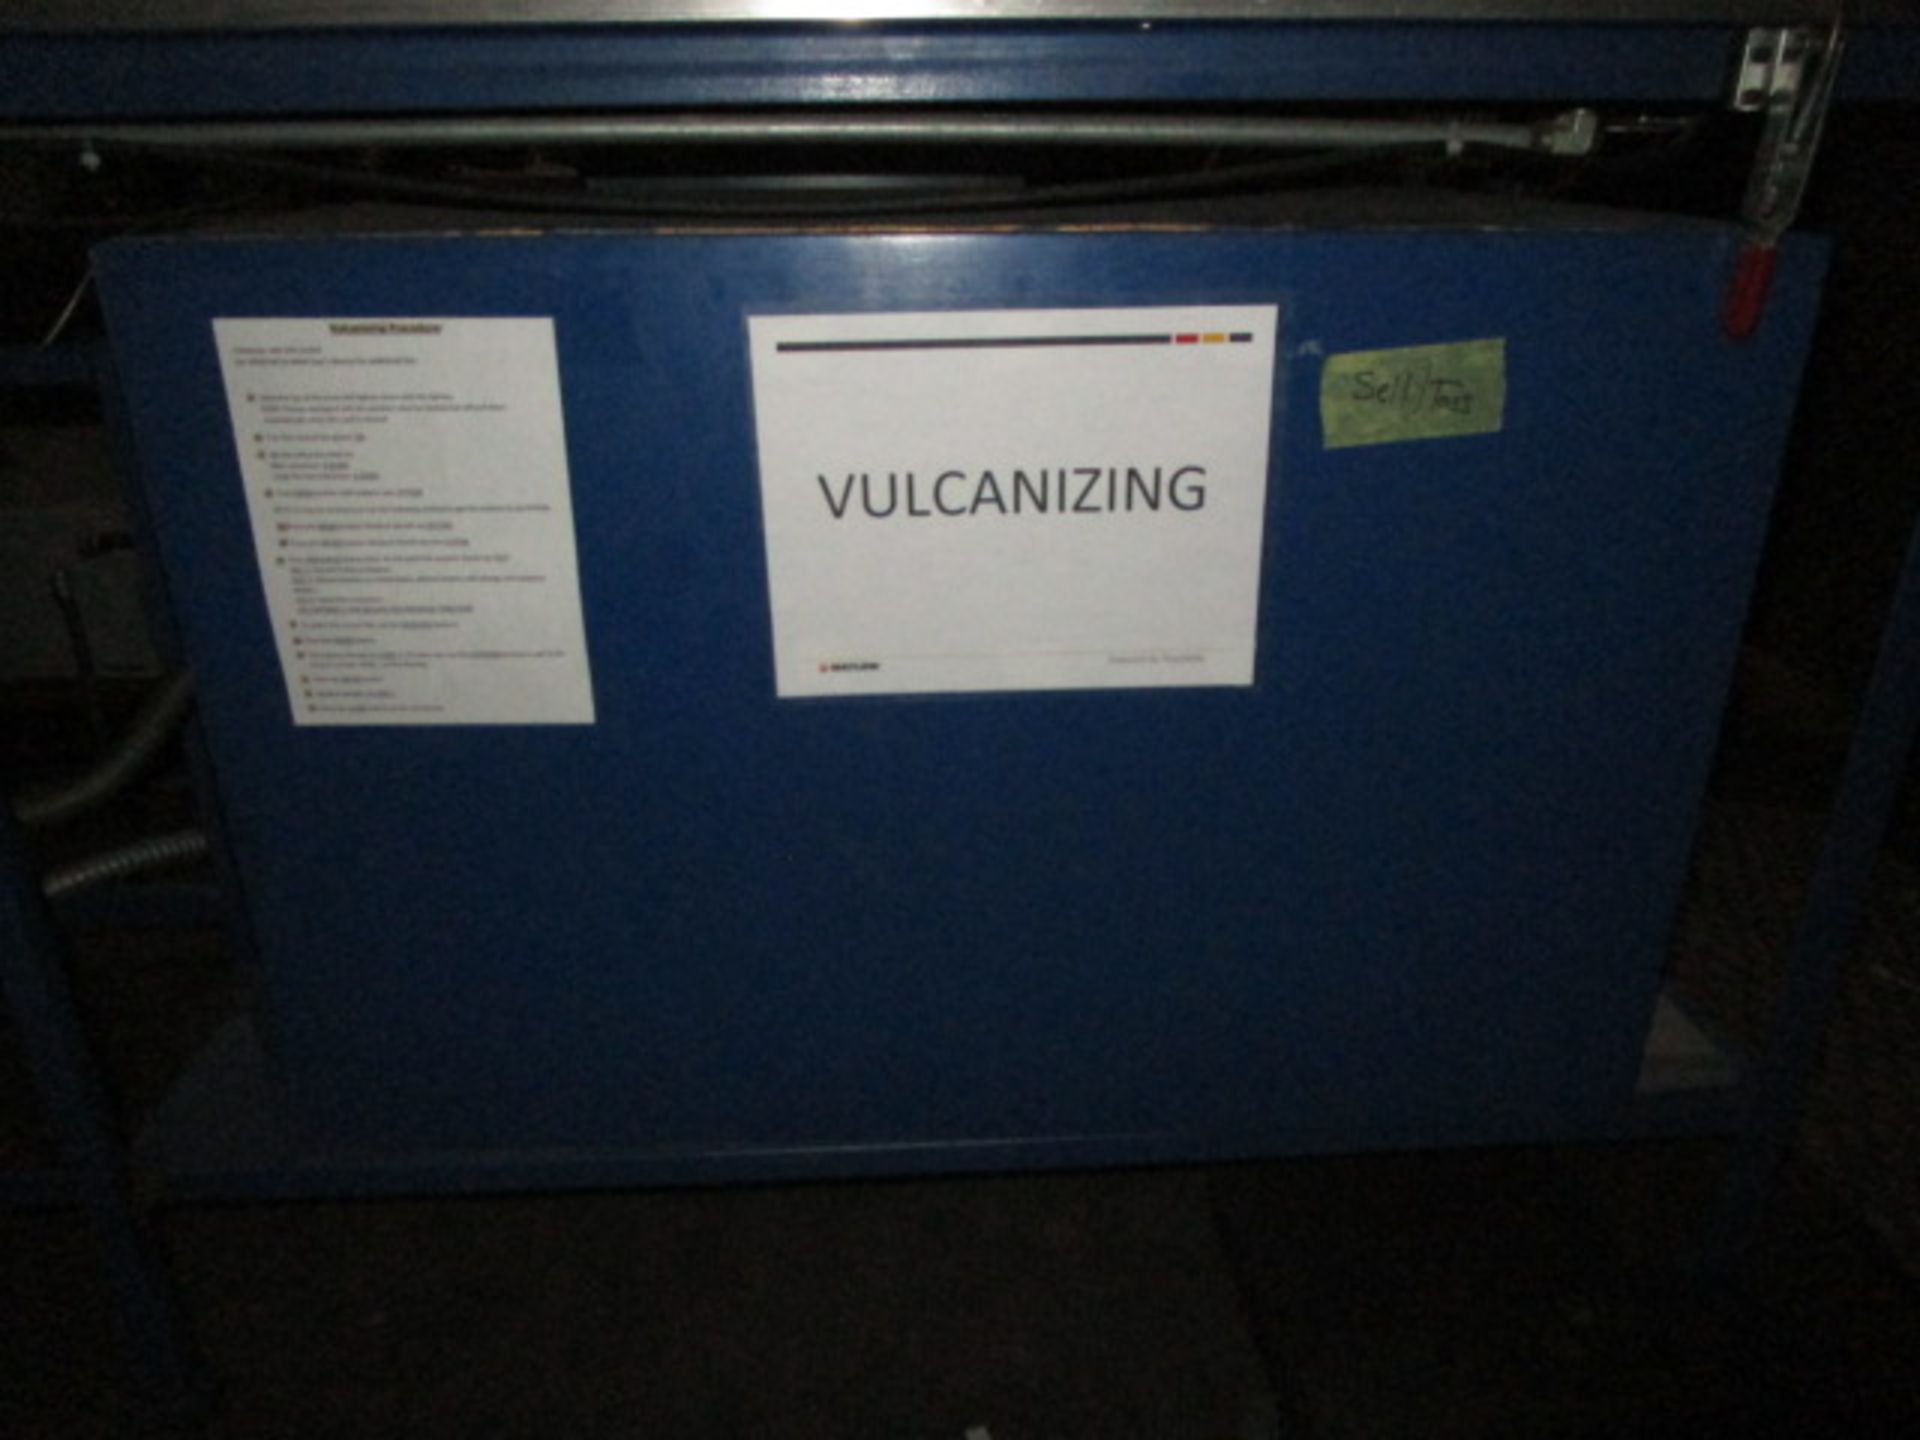 Vulcanization Tool | System Built for Annealing Adheasive Materials on to Flat Surfaces - Image 4 of 9